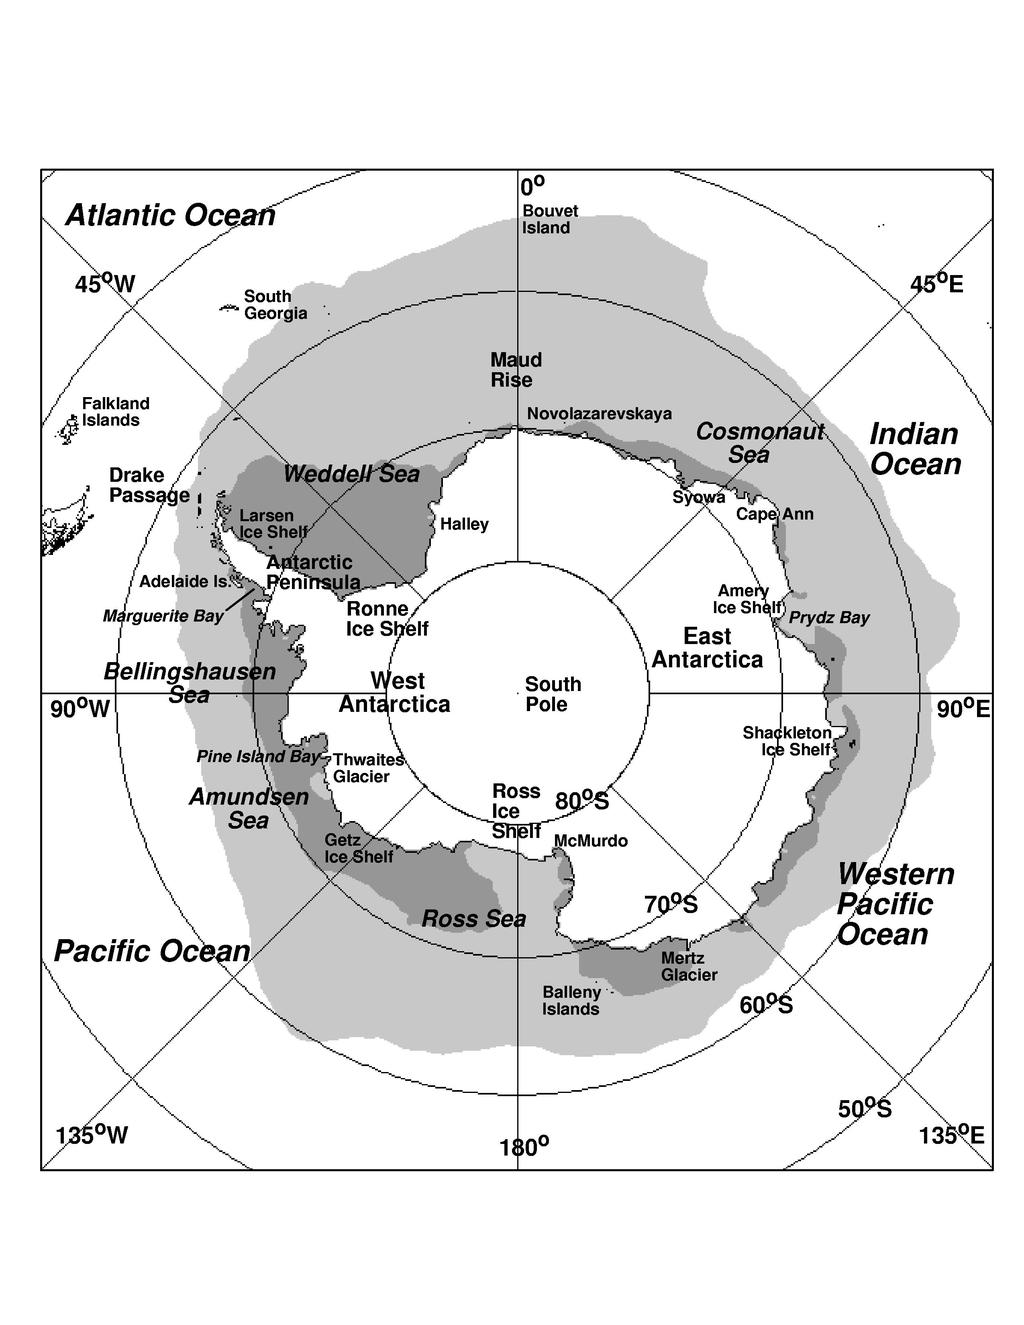 The atmospheric circulation patterns are also different and influenced mainly by the Northern Annular Mode (NAM) in the Arctic and the Southern Annular Mode (SAM) in the Antarctic.